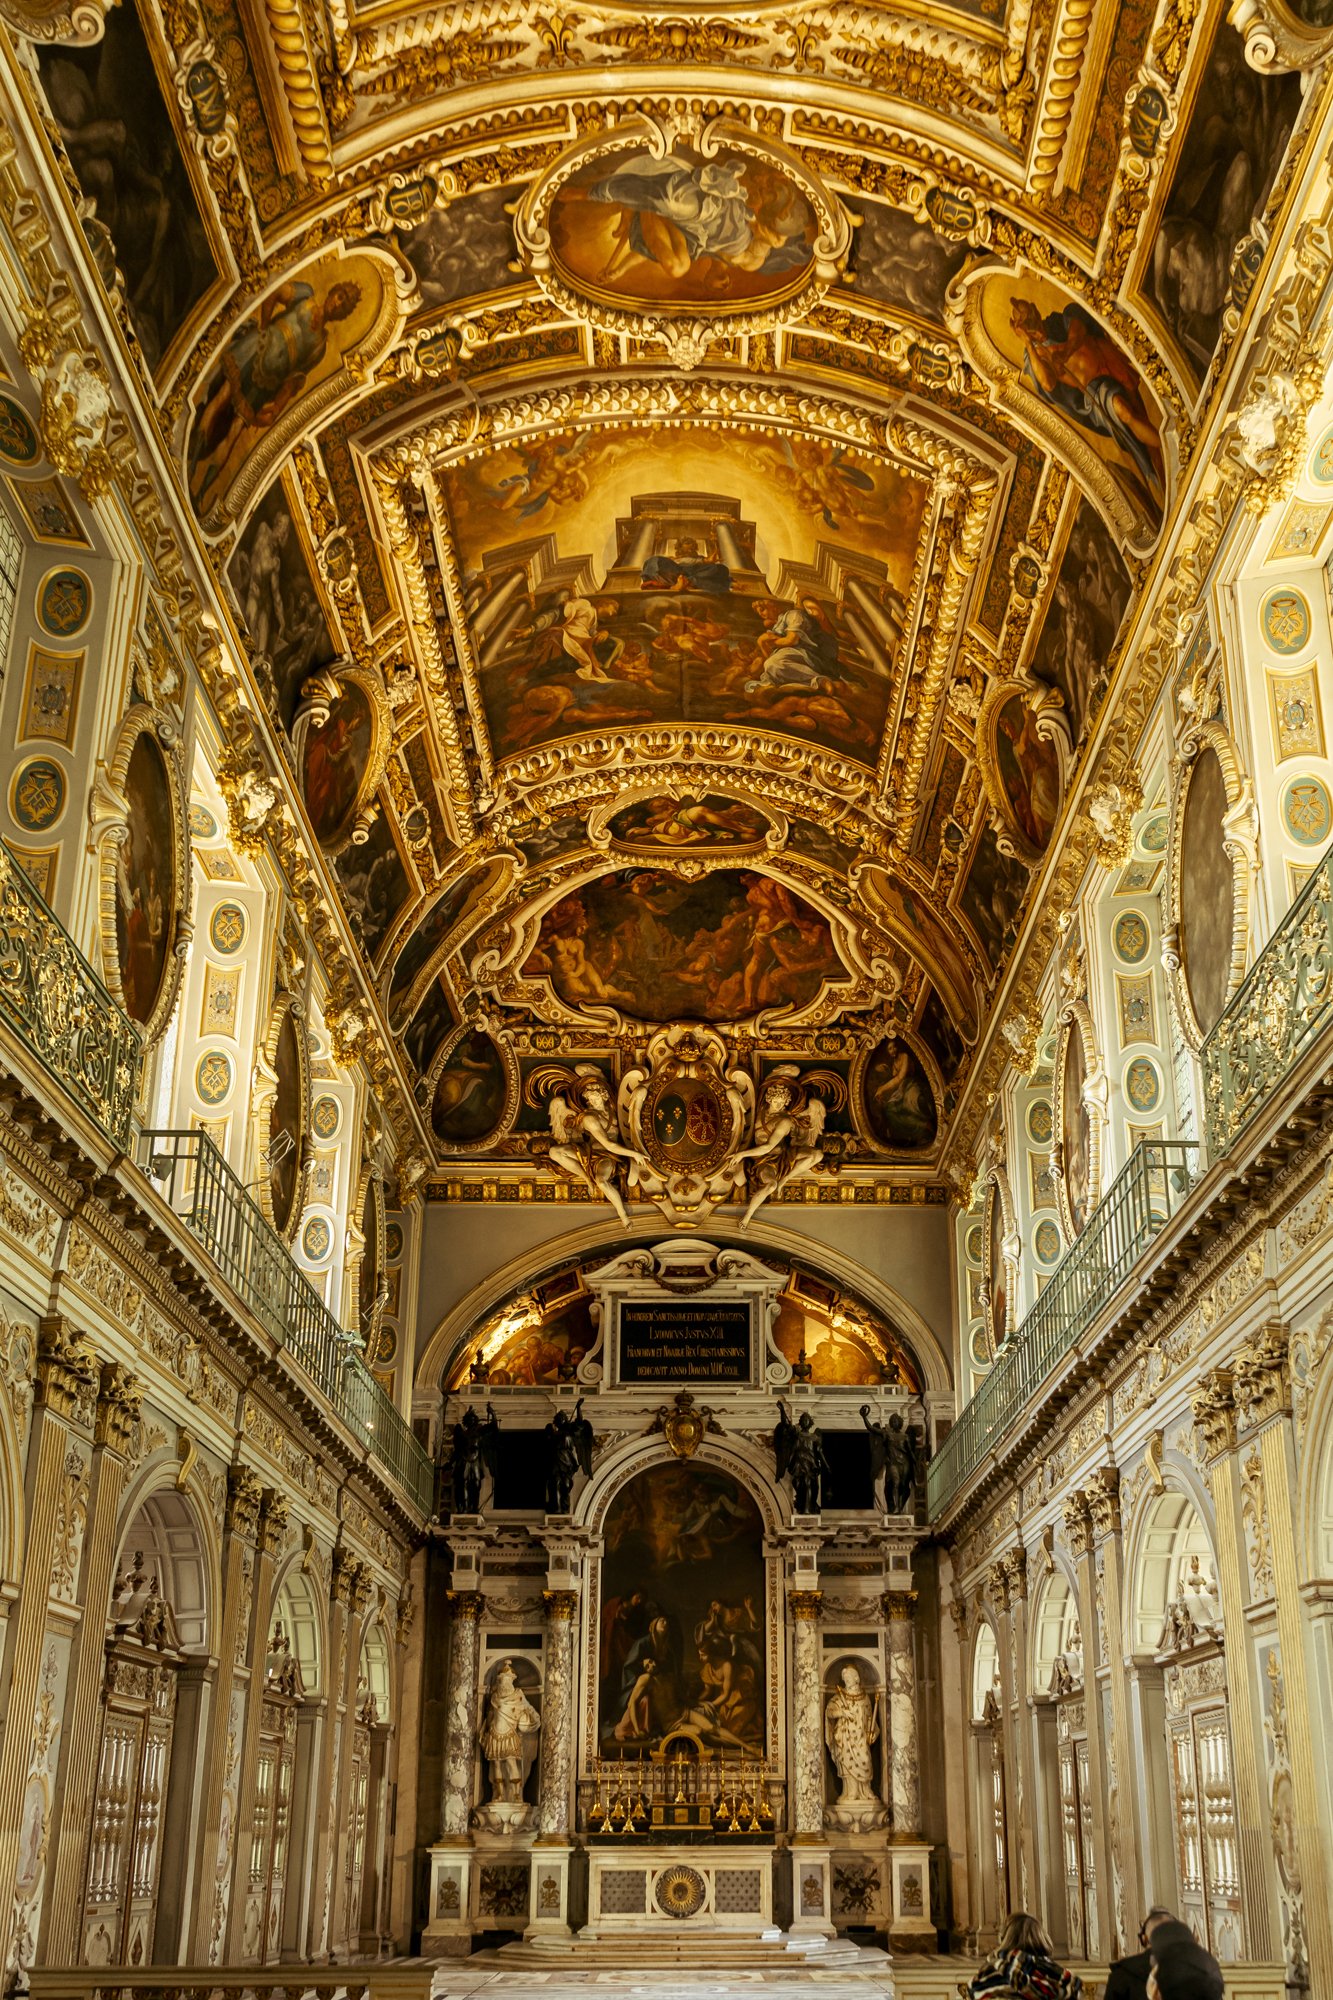 The Royal Chapel of the Trinity at Chateau de Fontainebleau